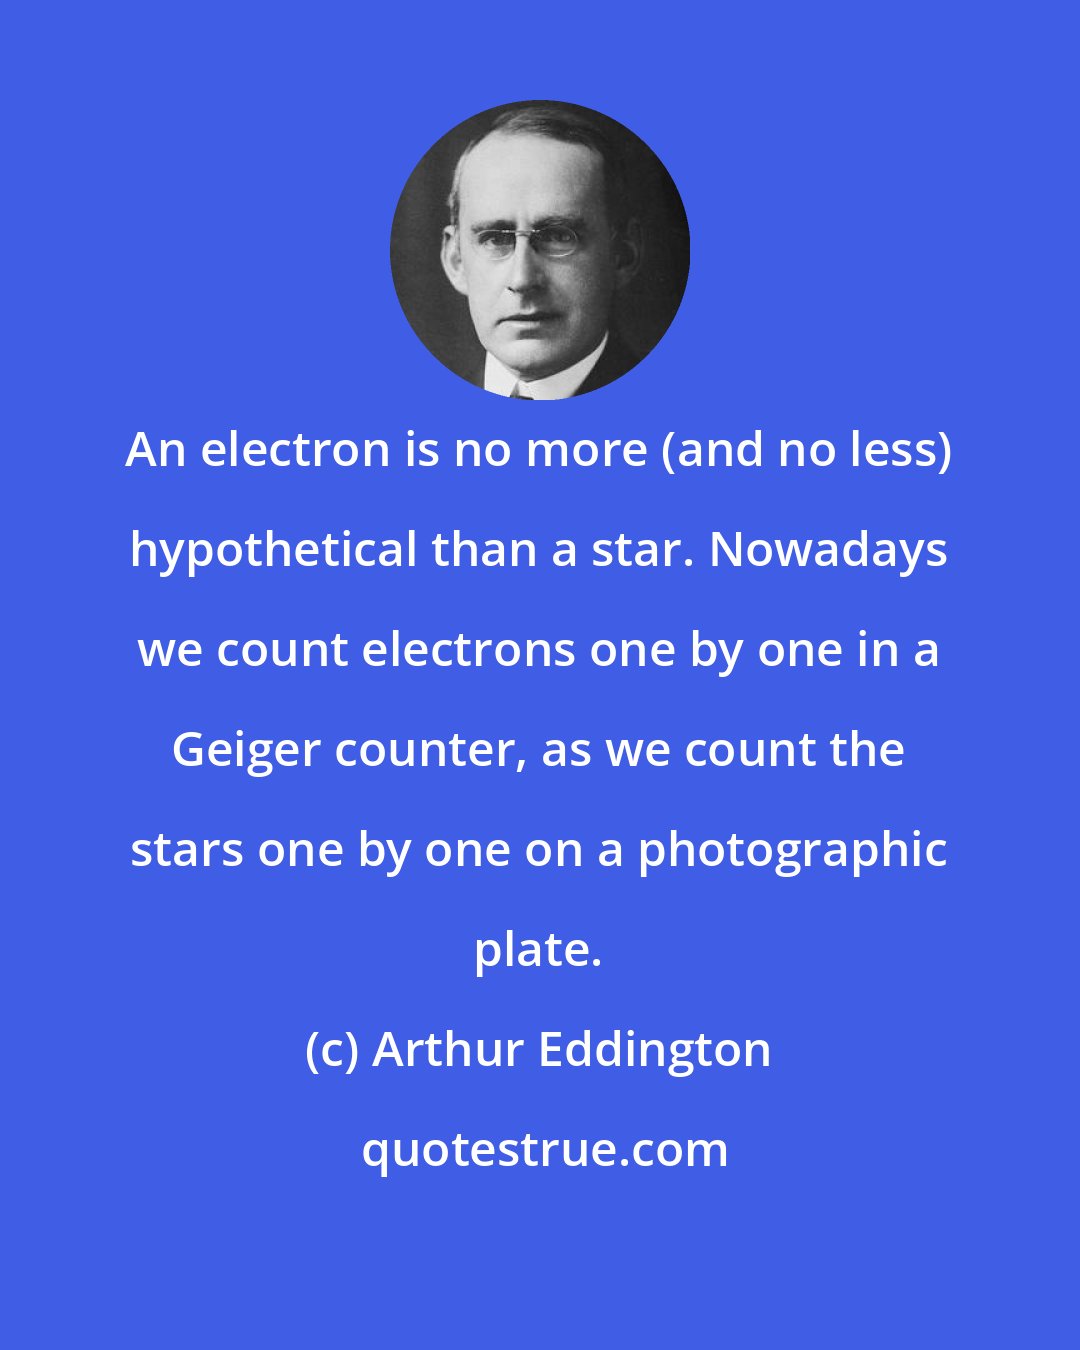 Arthur Eddington: An electron is no more (and no less) hypothetical than a star. Nowadays we count electrons one by one in a Geiger counter, as we count the stars one by one on a photographic plate.